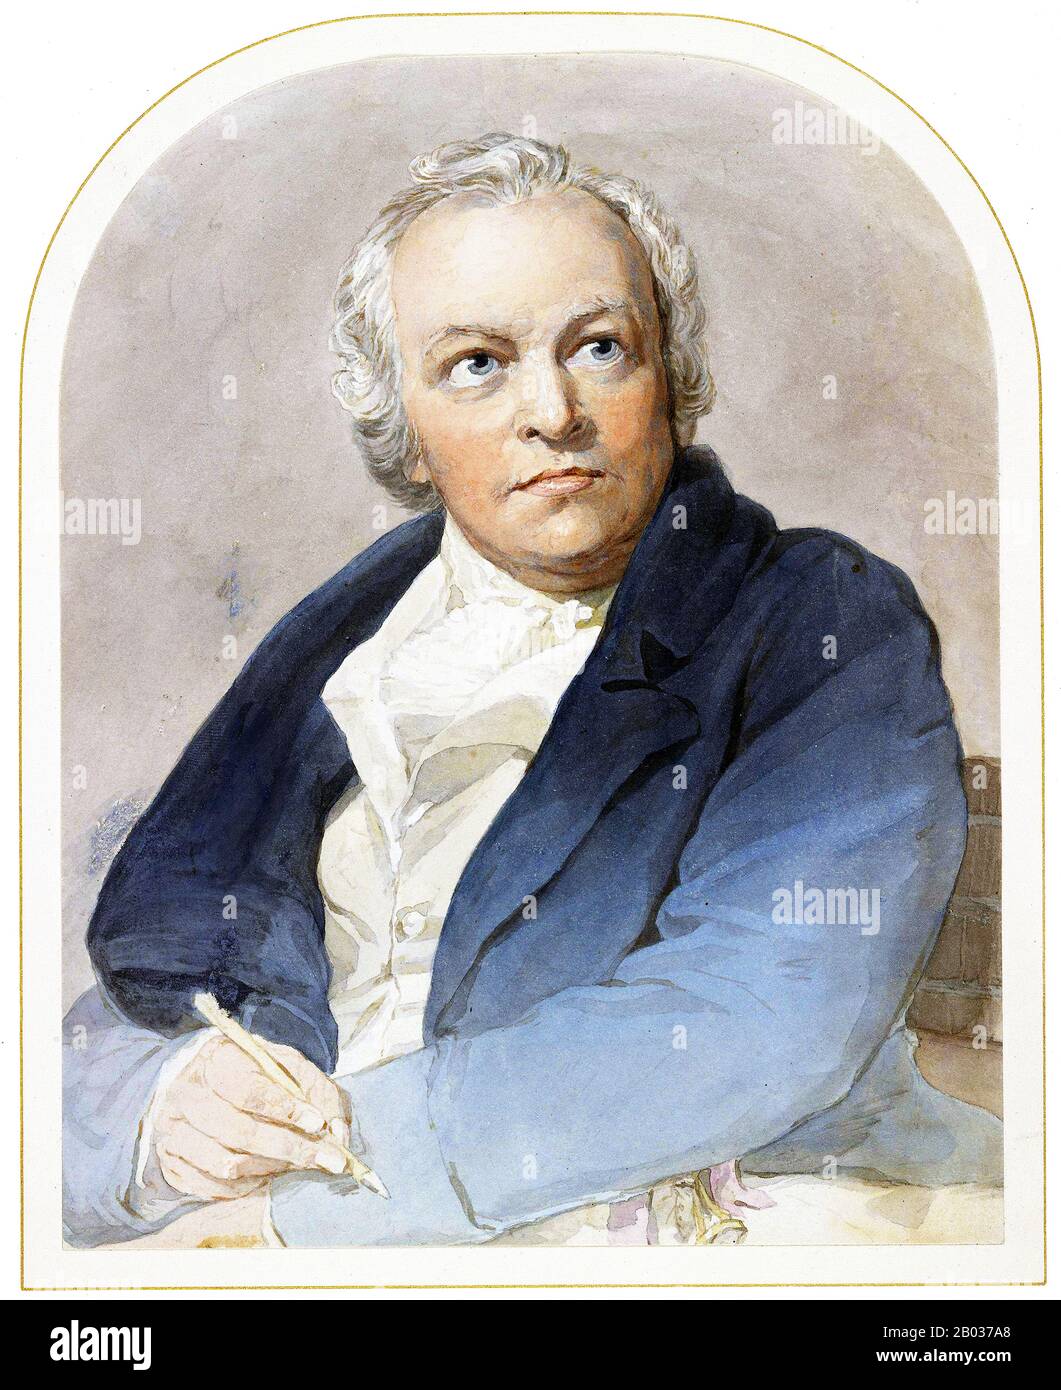 William Blake (28 November 1757 – 12 August 1827) was an English poet, painter, and printmaker. Largely unrecognised during his lifetime, Blake is now considered a seminal figure in the history of the poetry and visual arts of the Romantic Age.  His prophetic works have been said to form 'what is in proportion to its merits the least read body of poetry in the English language'. His visual artistry led one contemporary art critic to proclaim him 'far and away the greatest artist Britain has ever produced'. Stock Photo